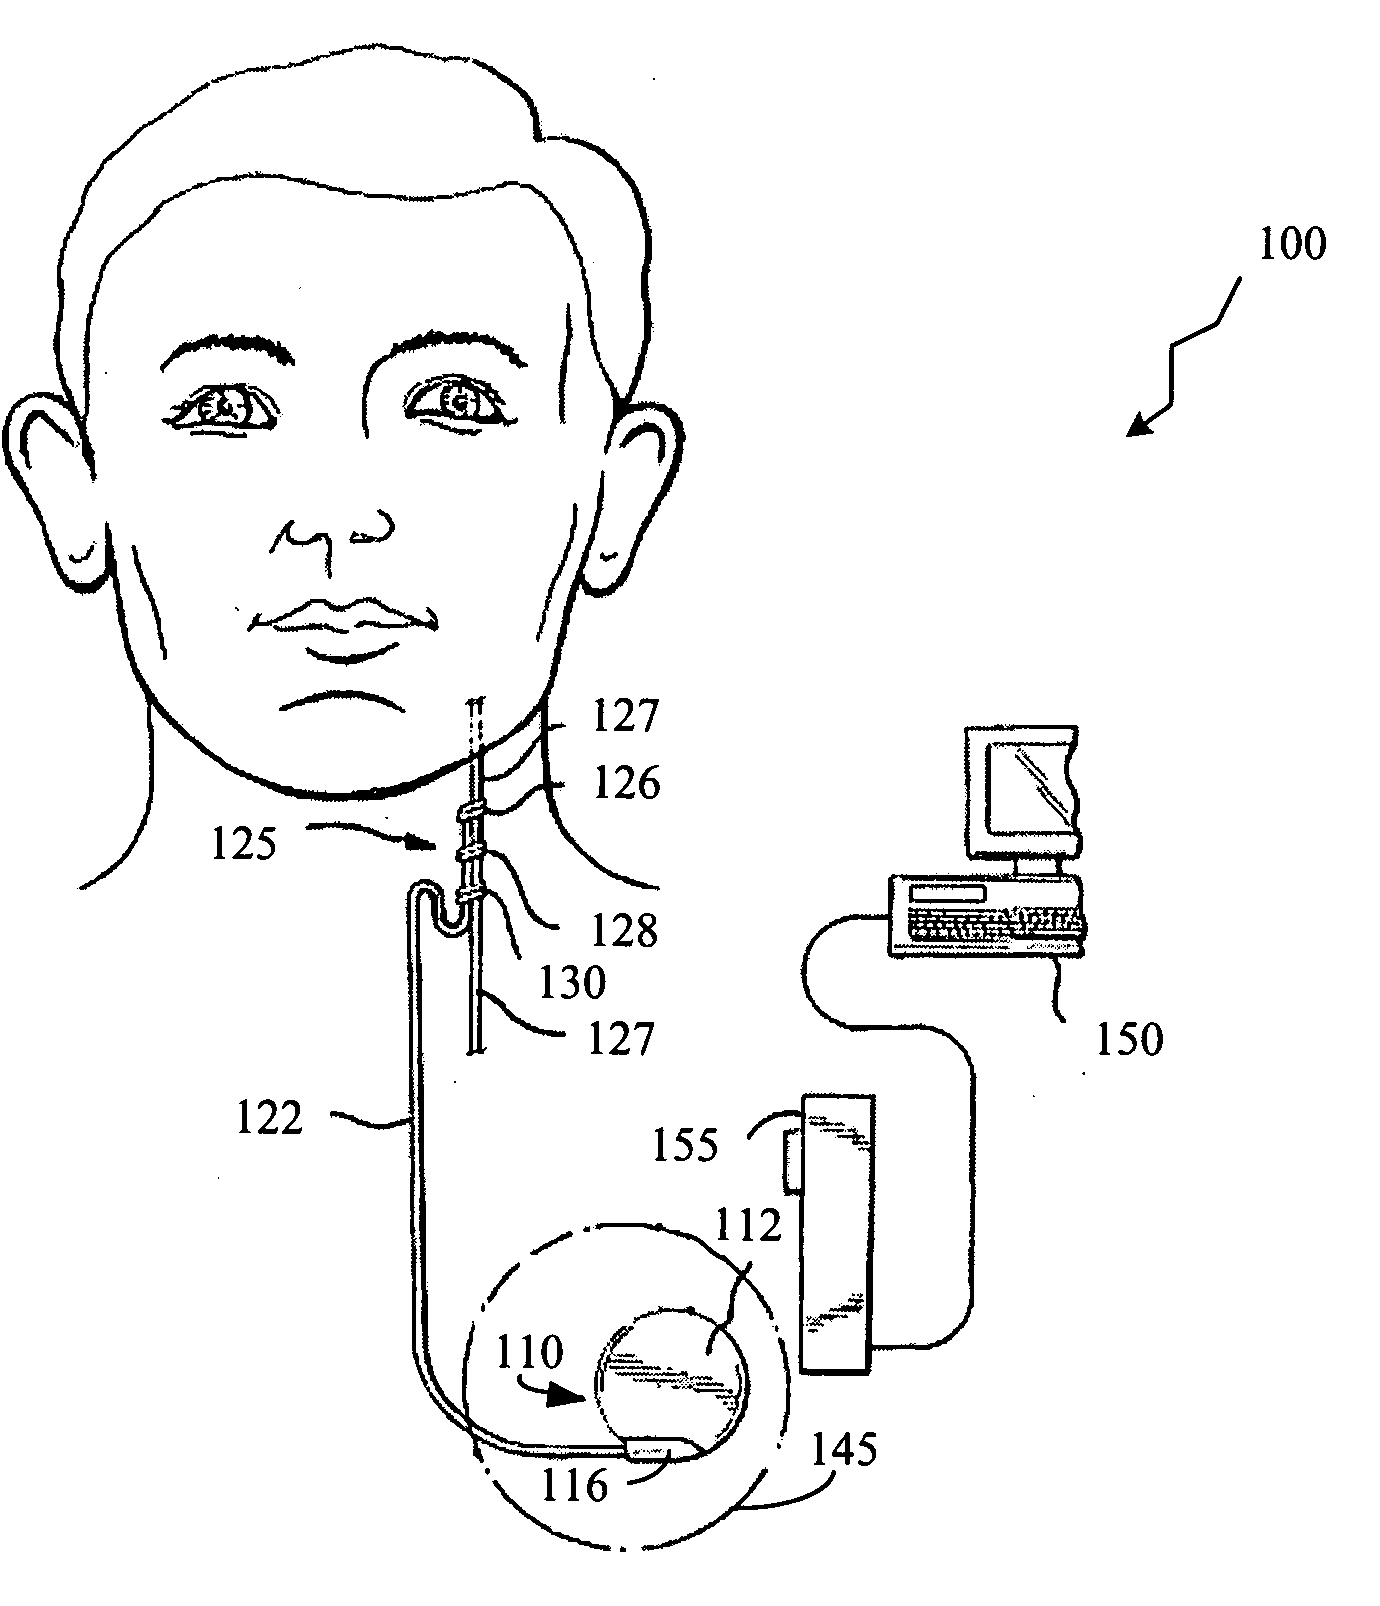 Method, apparatus and system for guiding a procedure relating to an implantable medical device